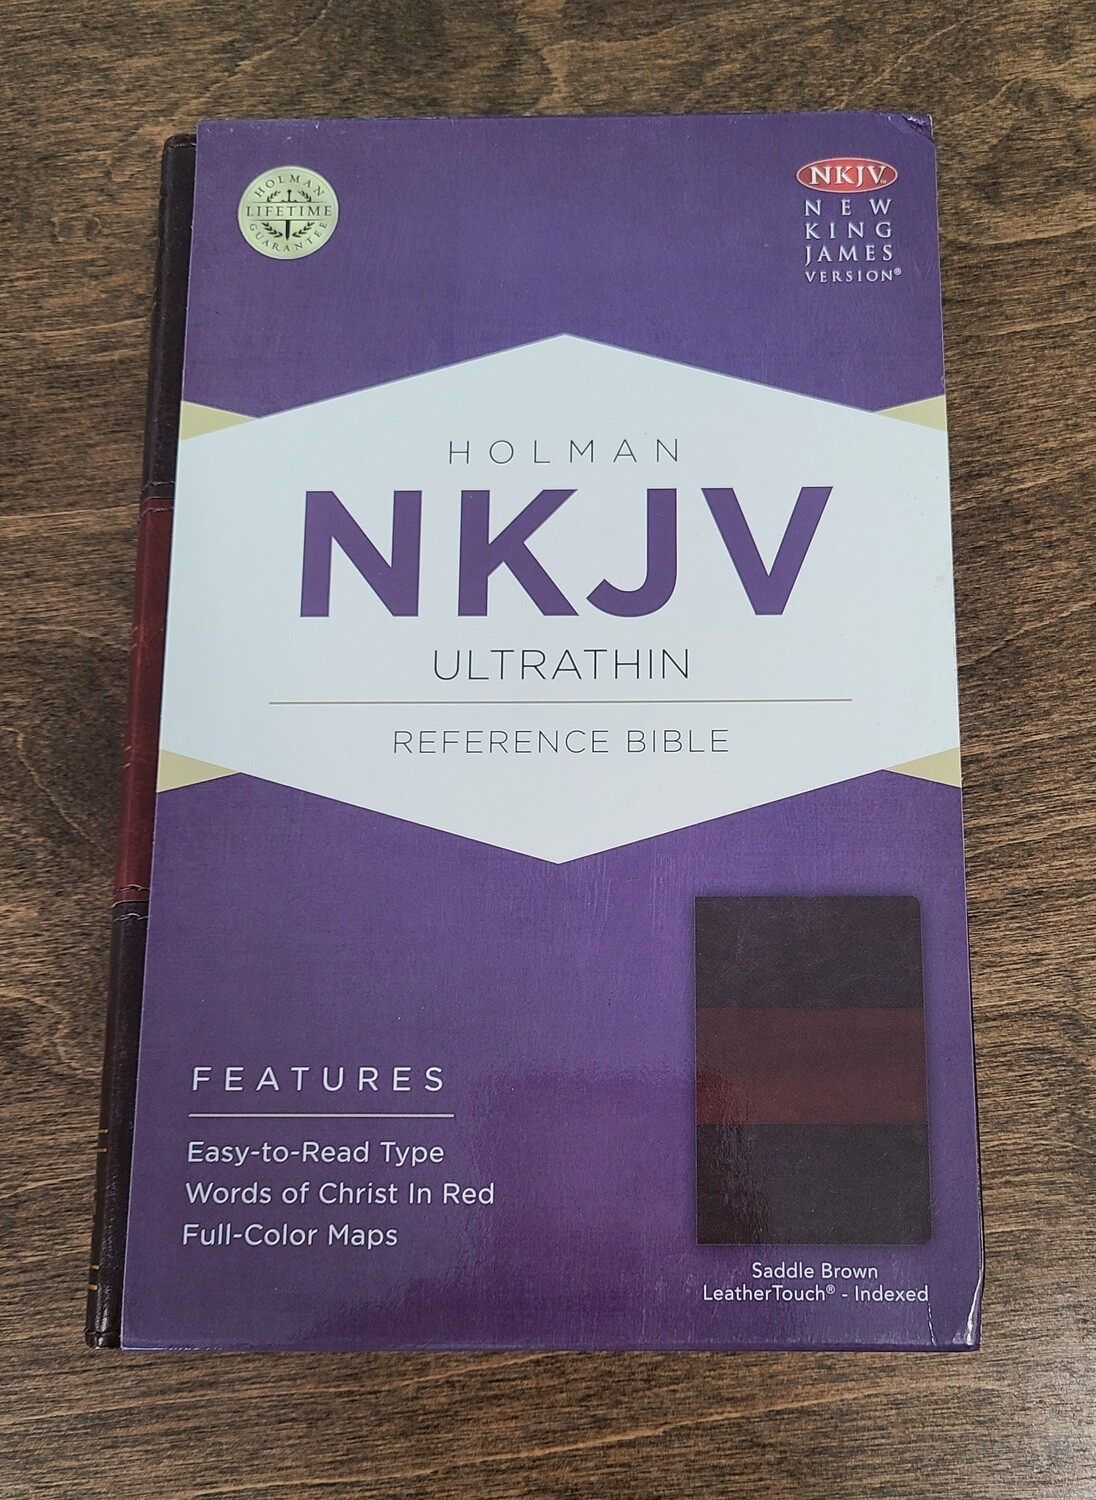 NKJV Holman Ultrathin Reference Bible - SaddleBrown LeatherTouch - Thumb Indexed